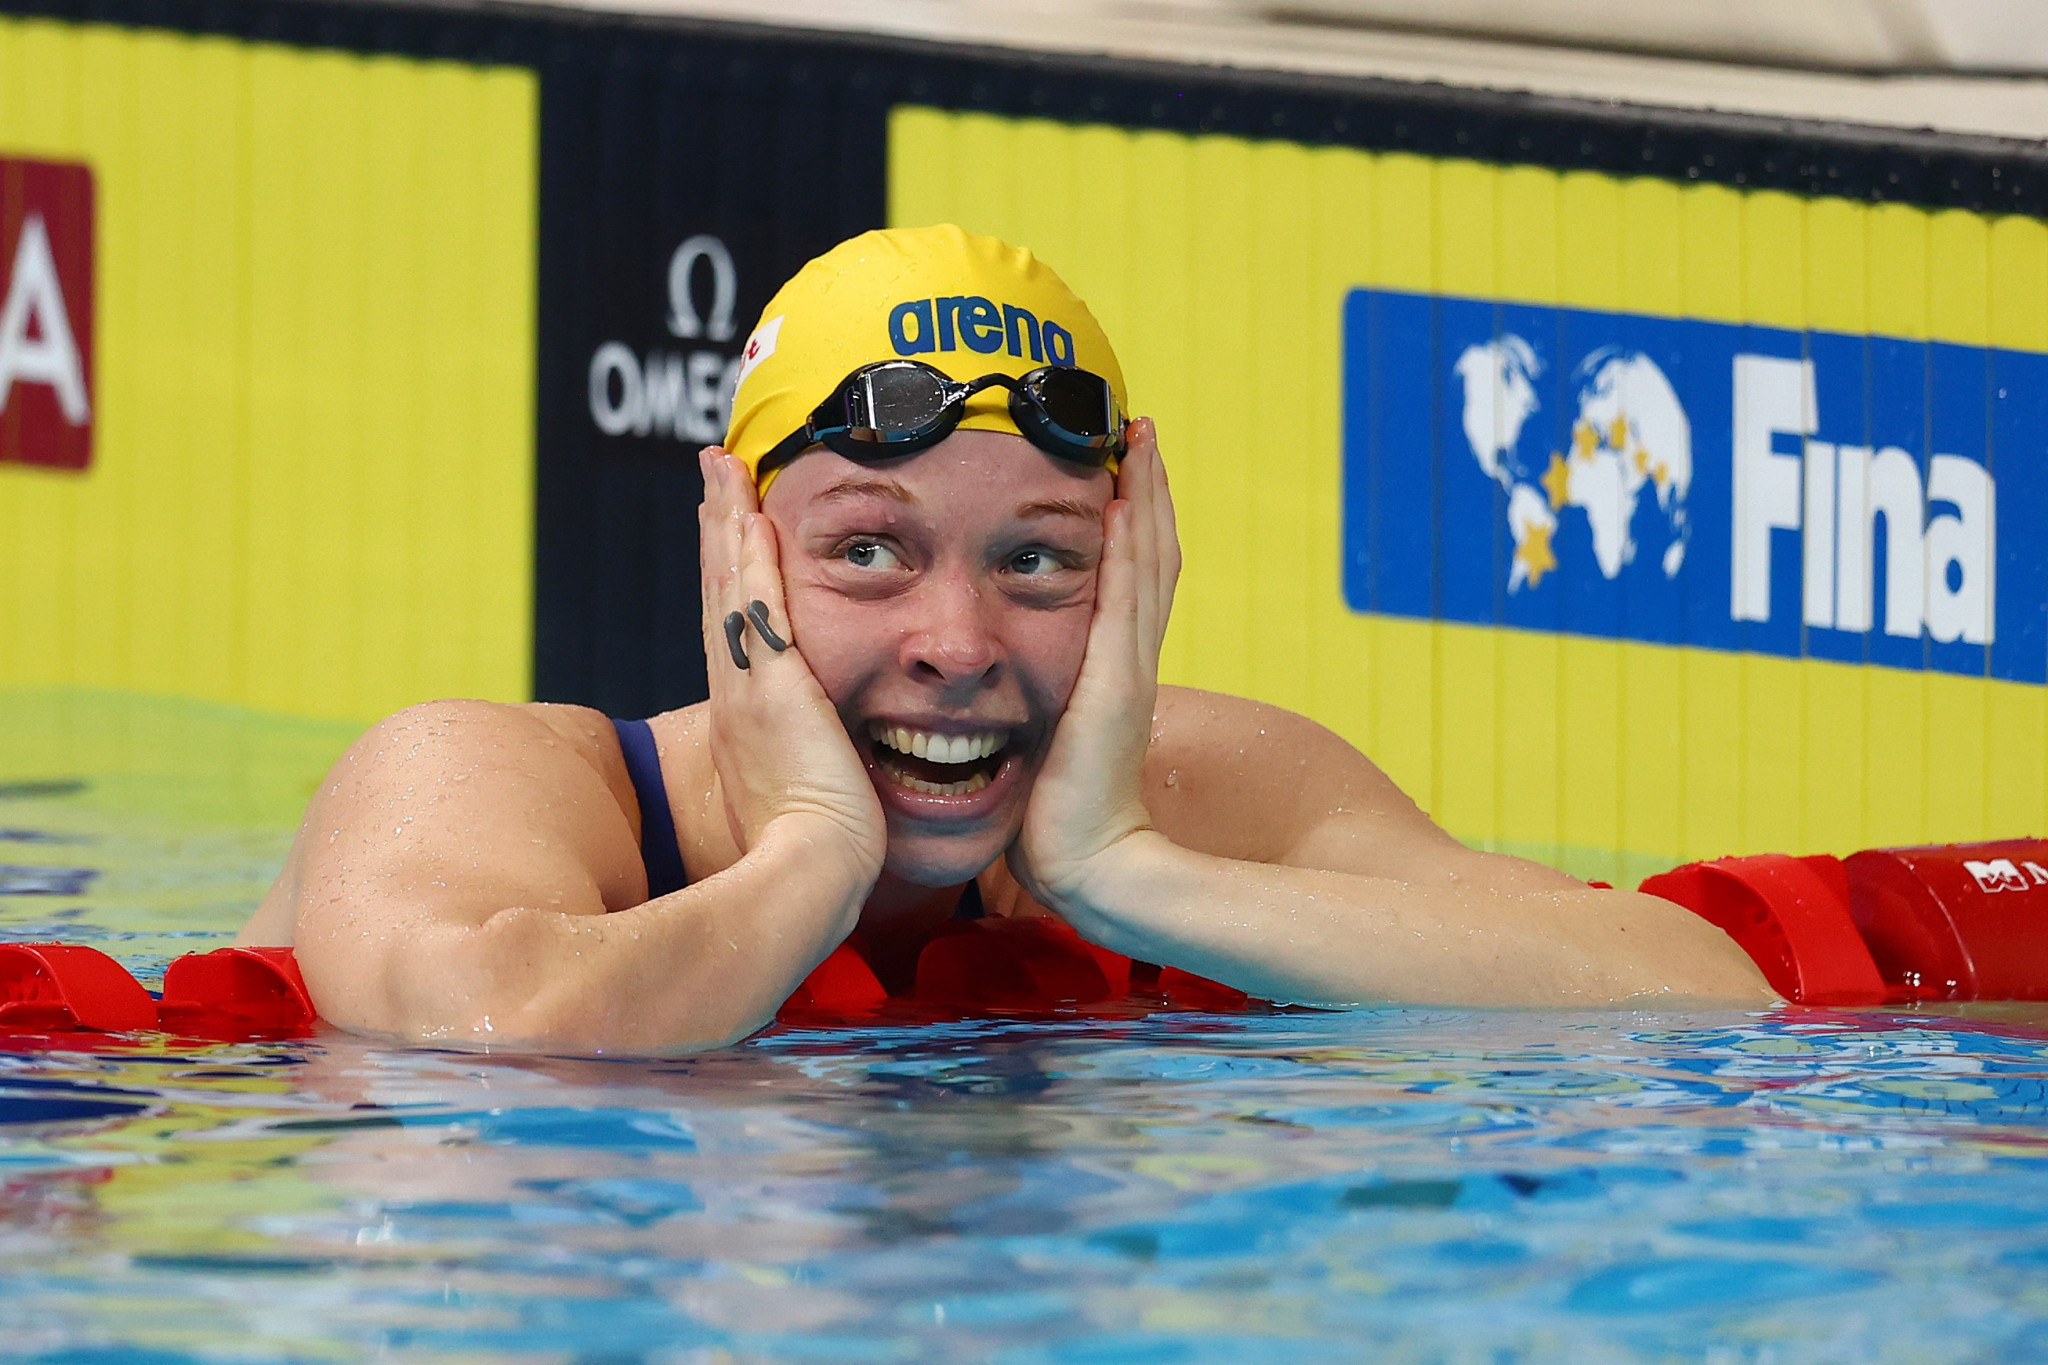 Louise Hansson triumphed in the women's 100m backstroke final ©Getty Images